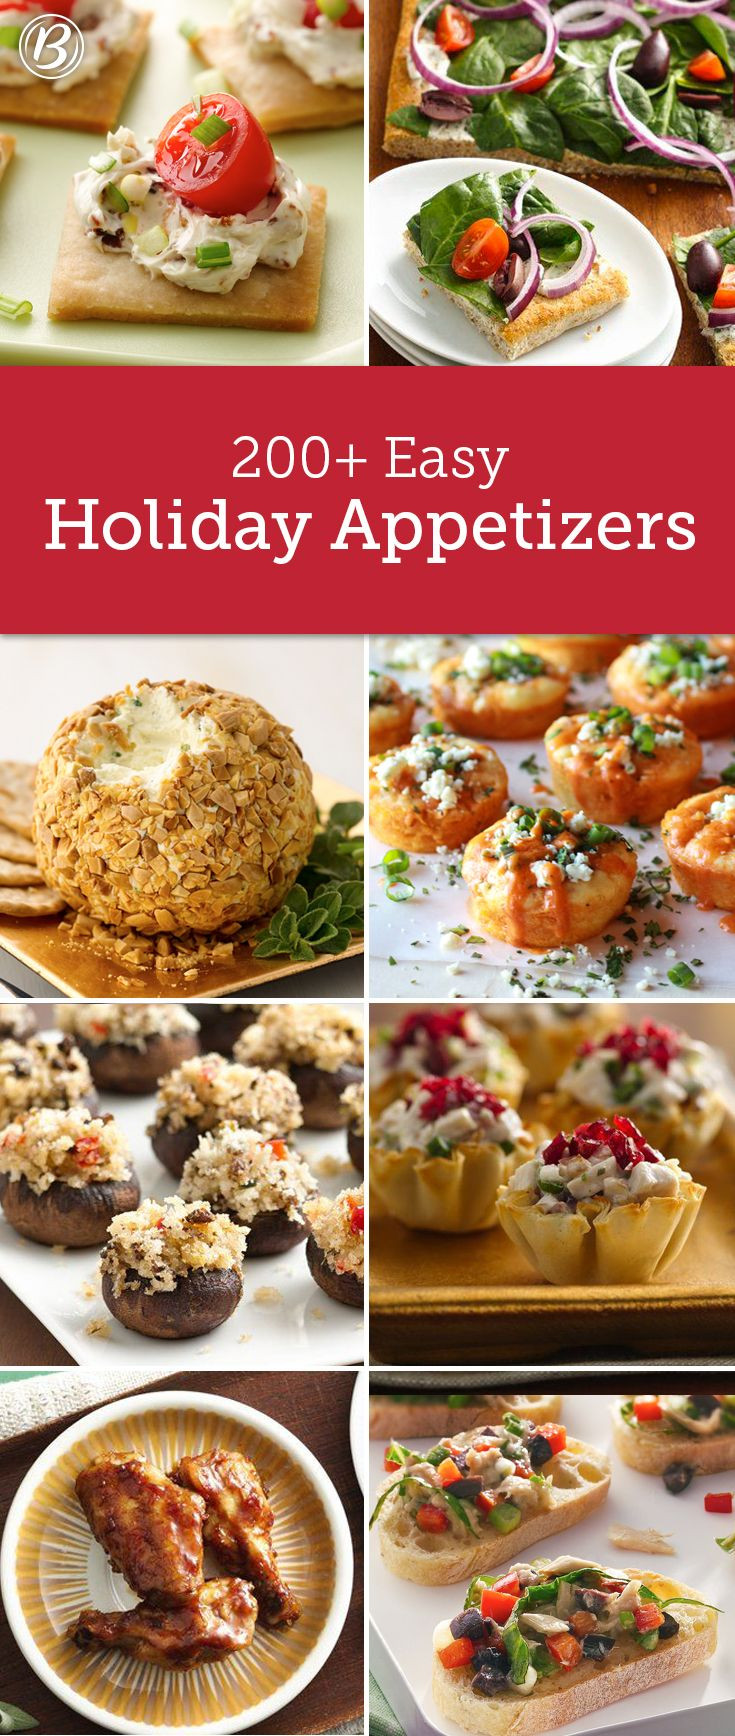 Christmas Party Appetizers Pinterest
 48 best Easy Holiday Appetizers images on Pinterest